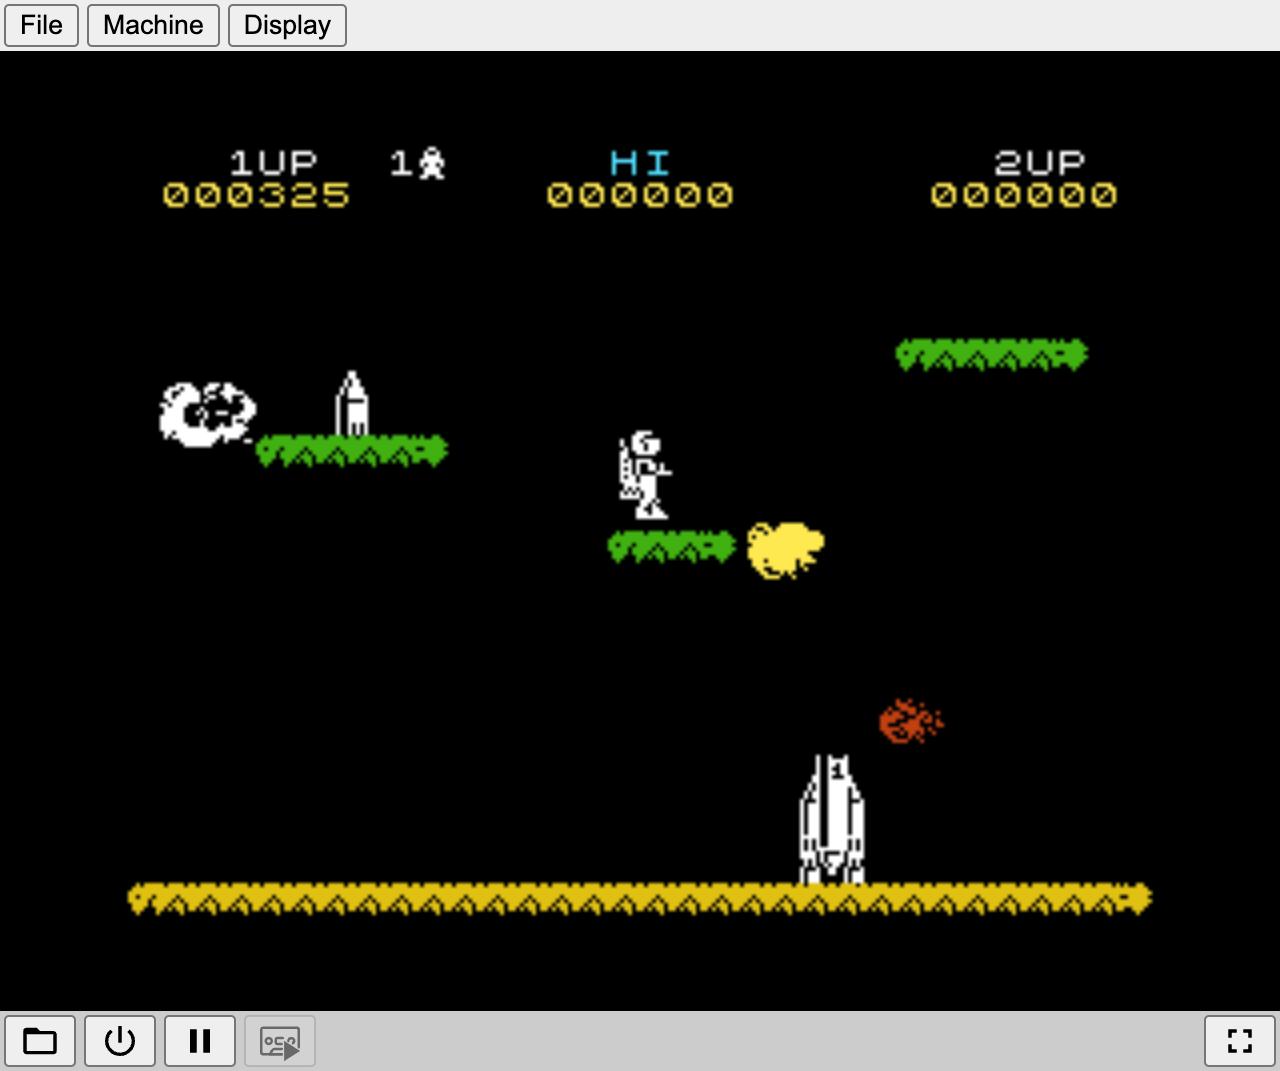 Screenshot of Jetpac playing in a web browser.